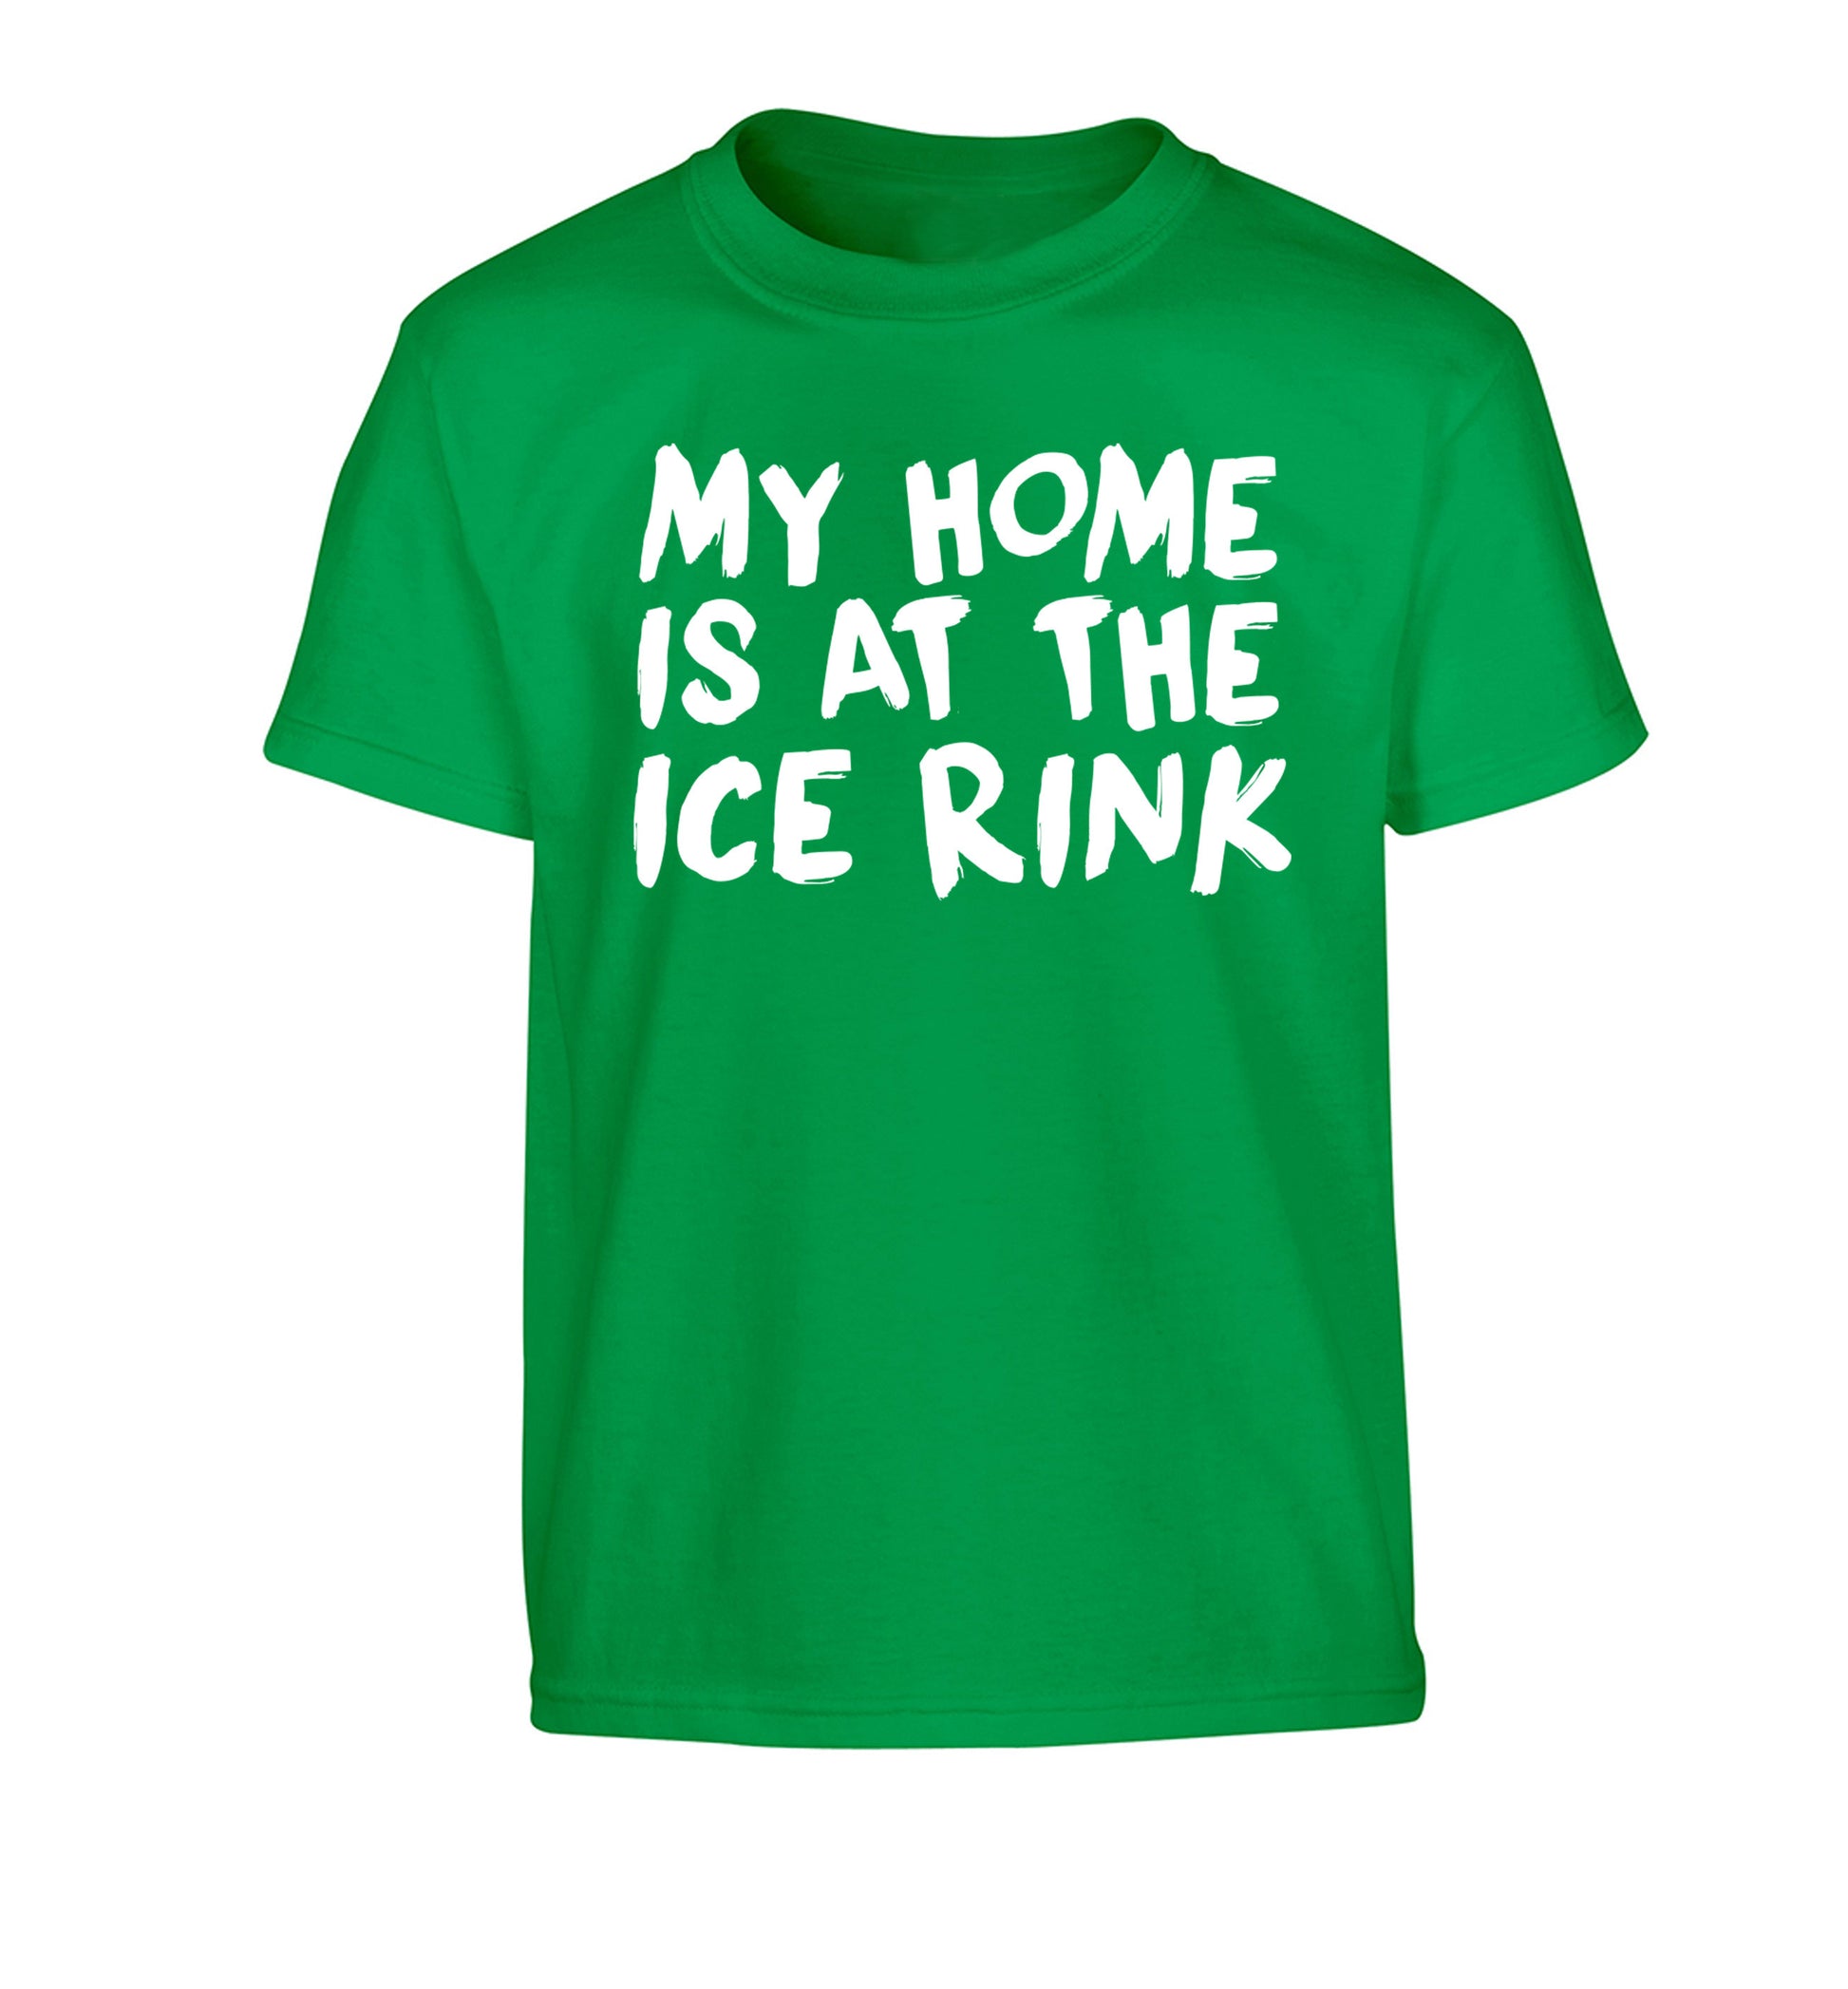 My home is at the ice rink Children's green Tshirt 12-14 Years